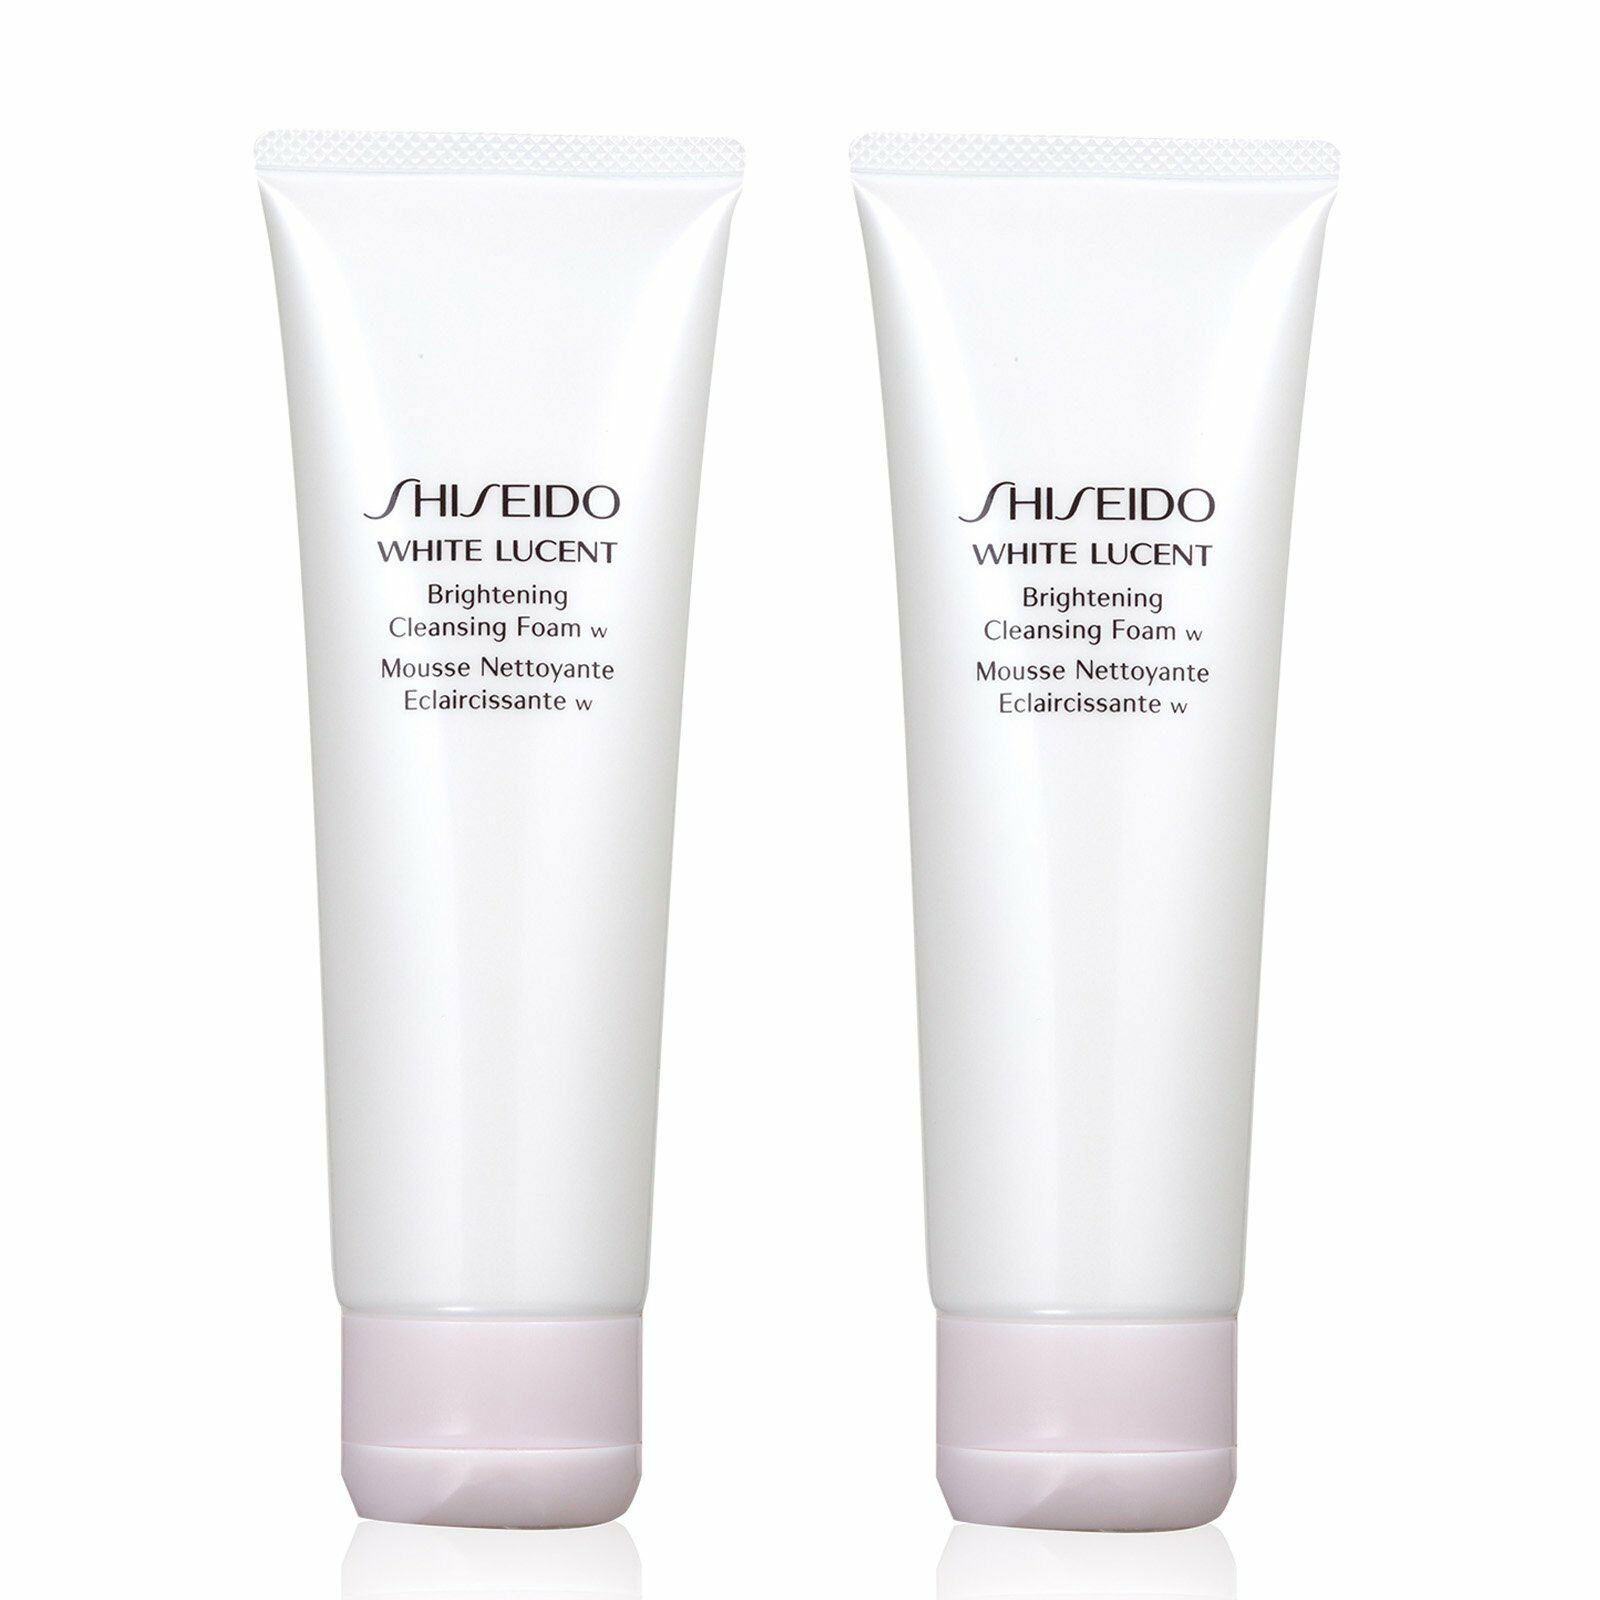 Shiseido White Lucent. Санскрит шисейдо White Lucent. Rose extract Brightening Cleanser. Brightening cleanser